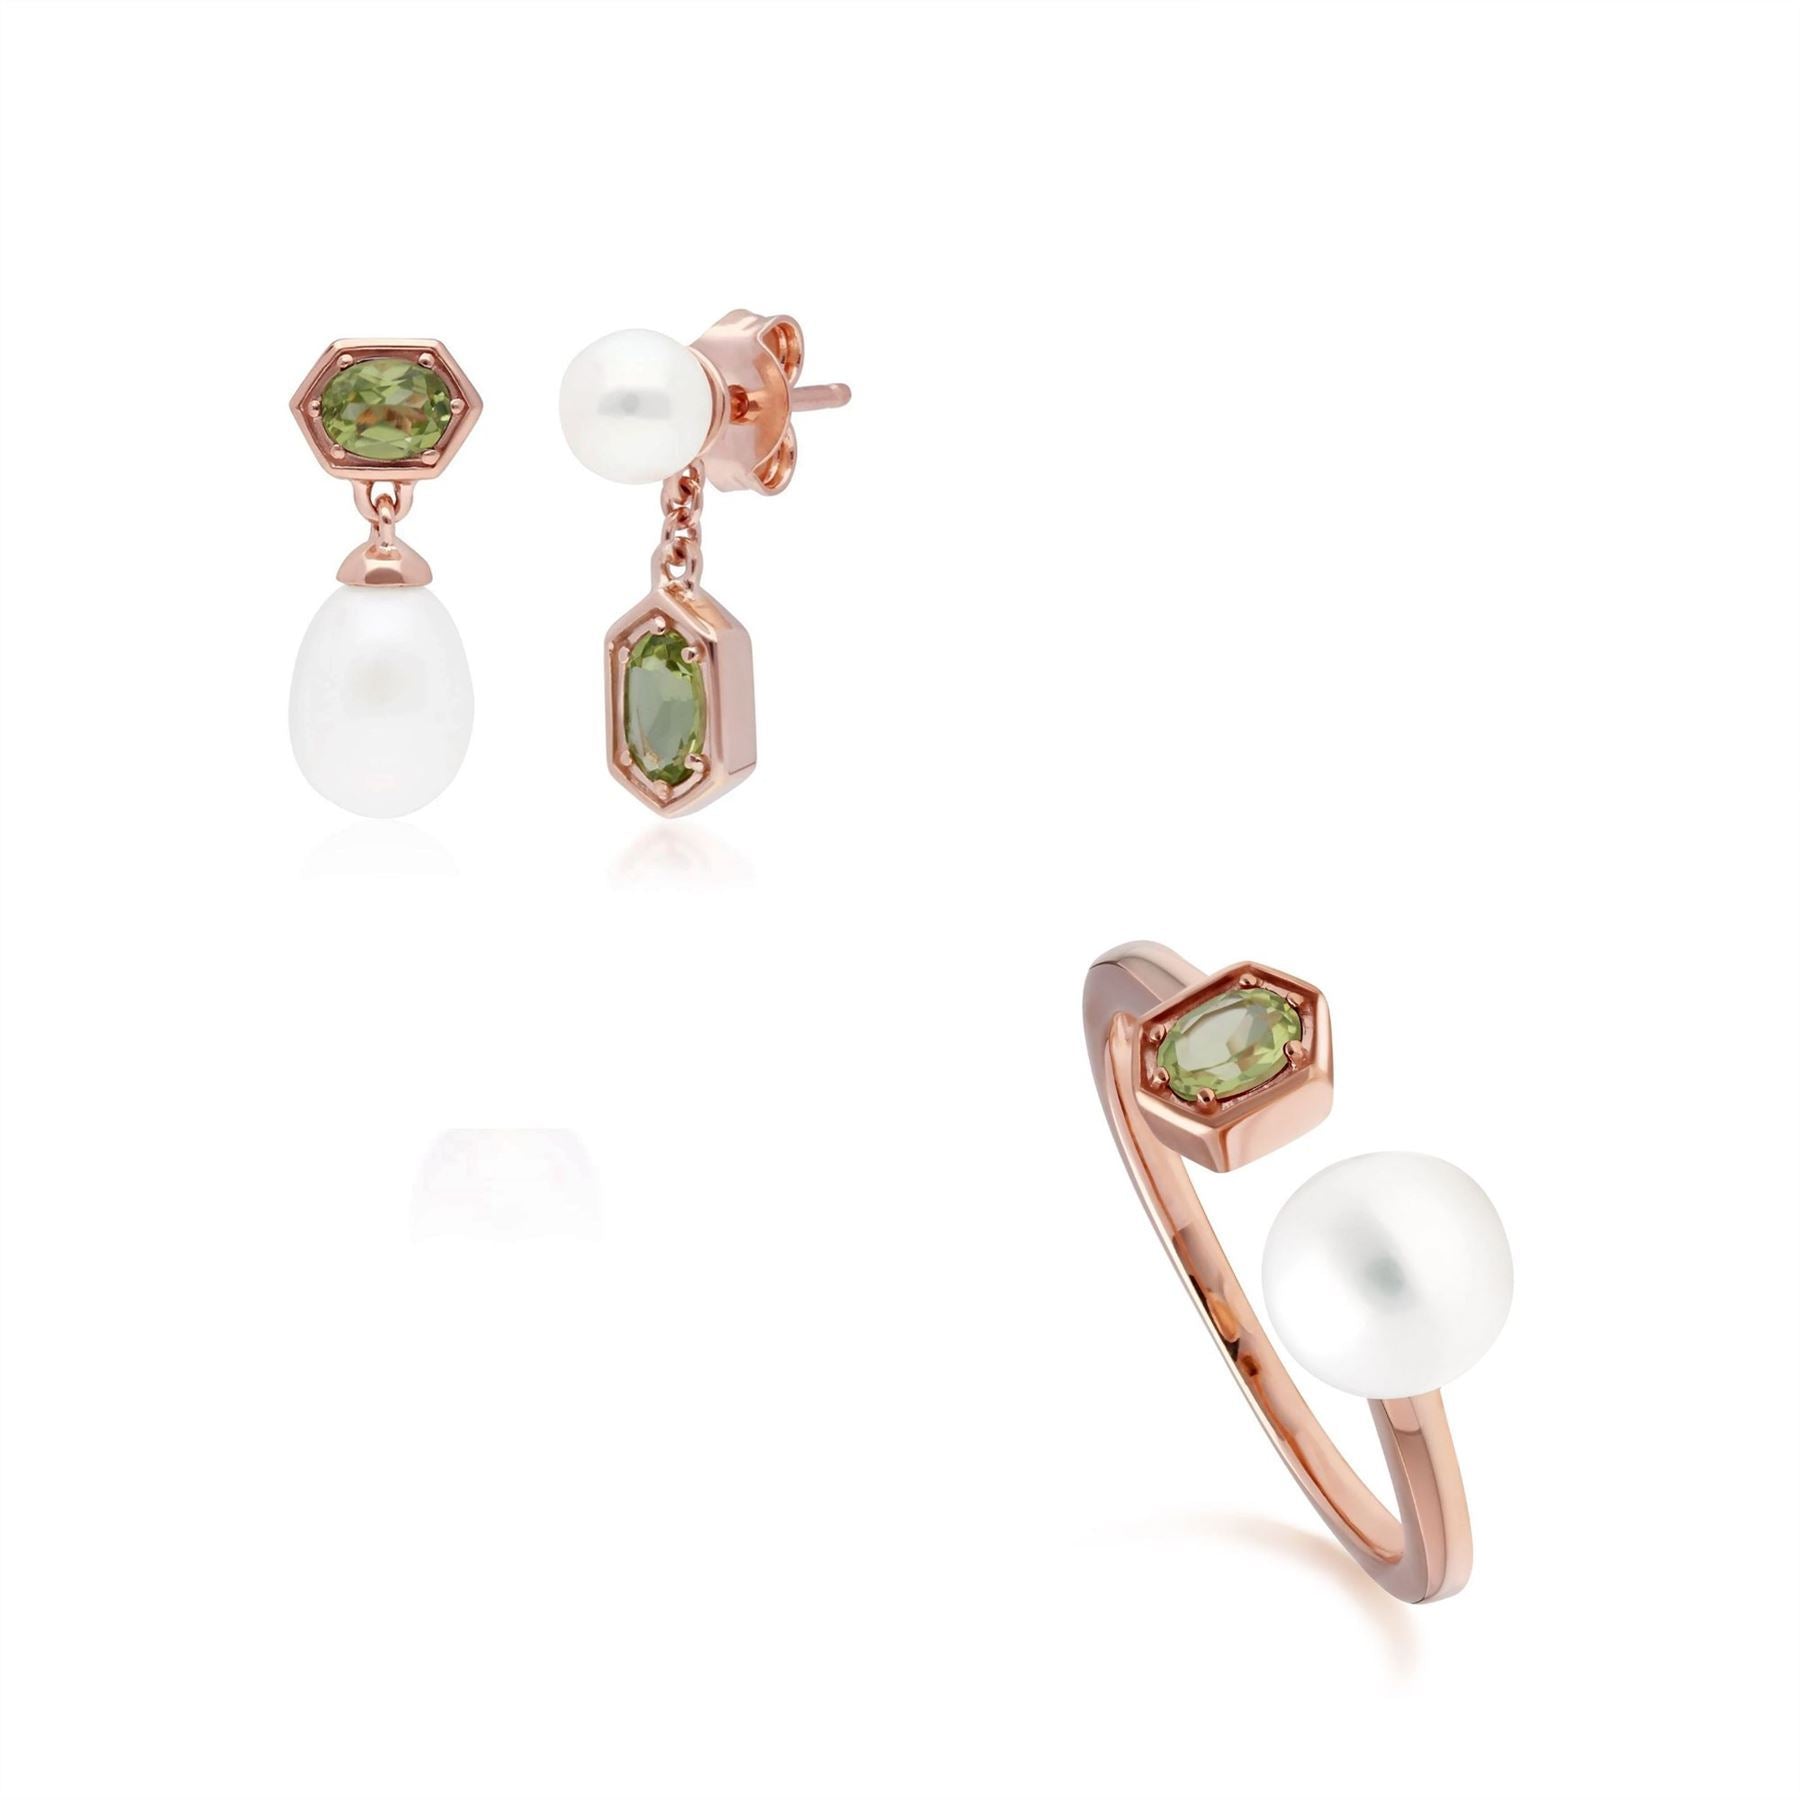 Modern Pearl & Peridot Earring & Ring Set in Rose Gold Plated Sterling Silver